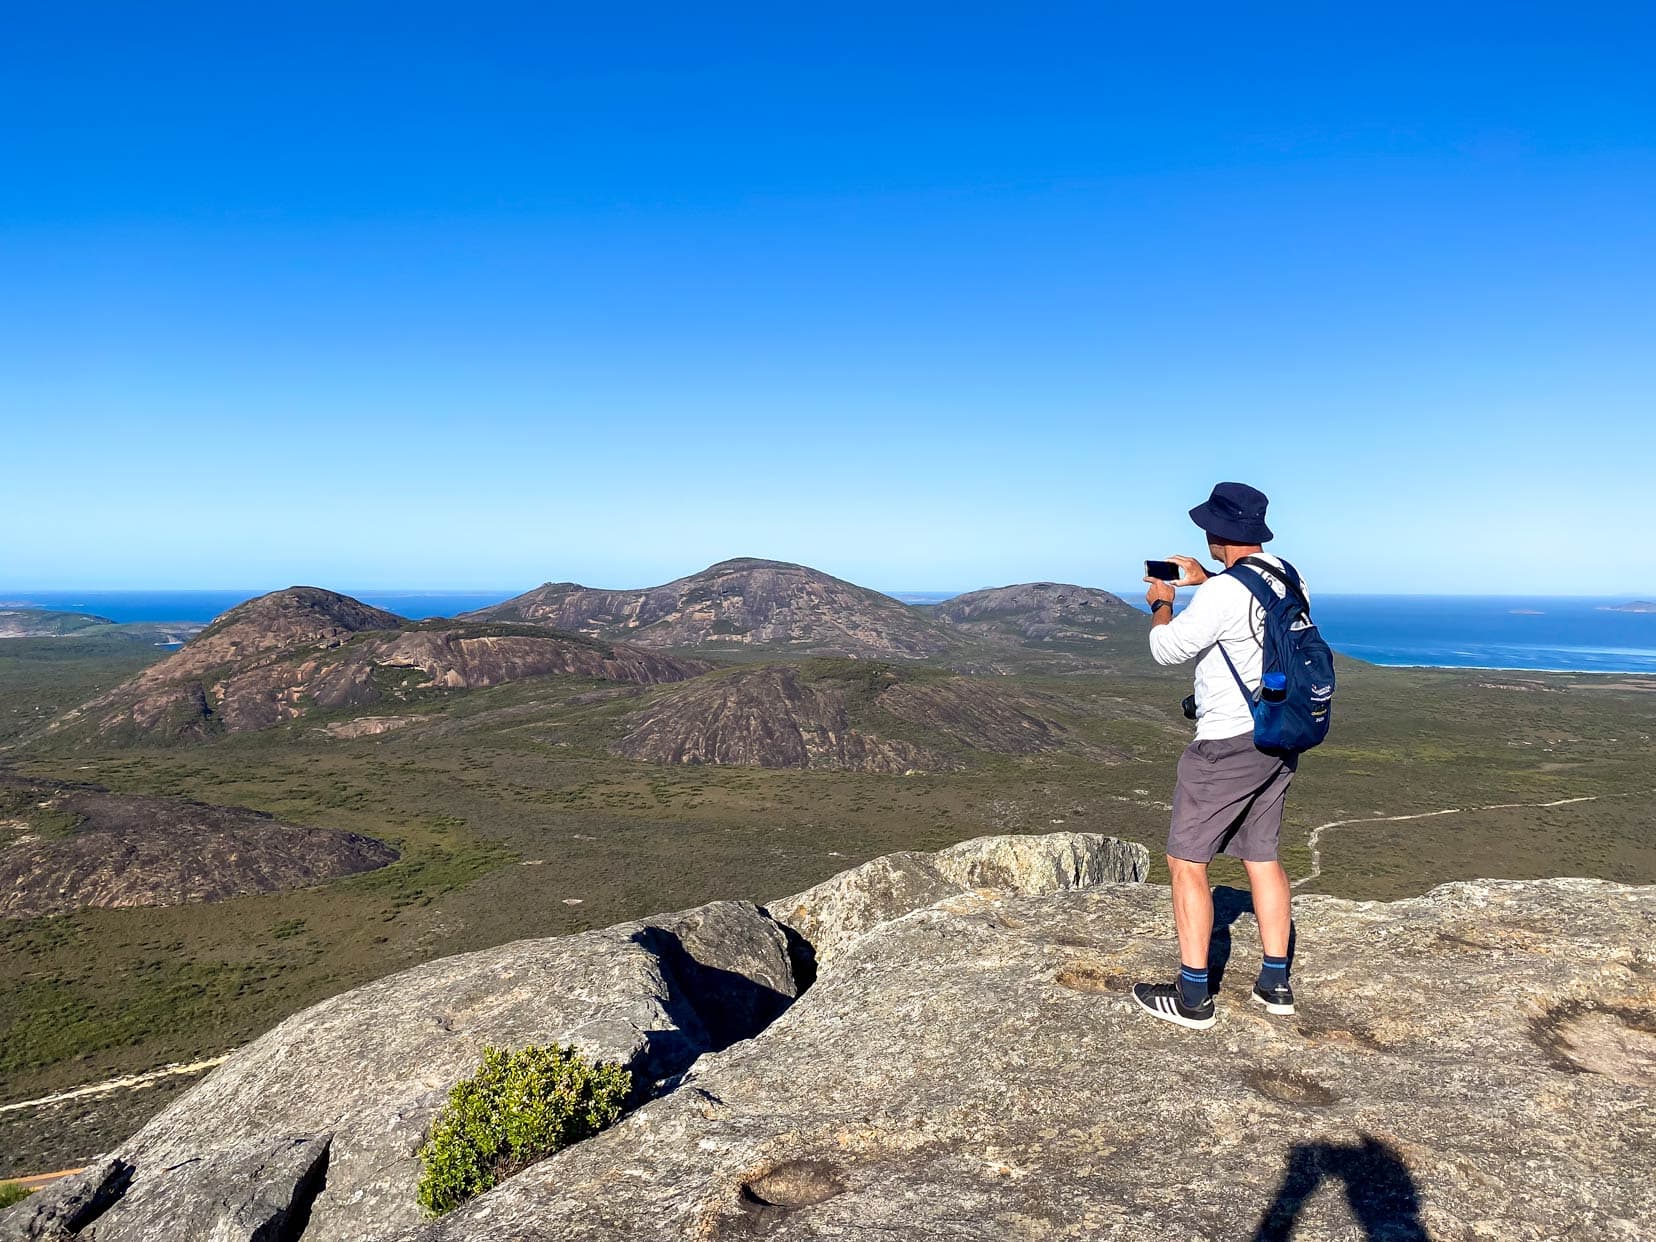 Lars on Frenchman Peak taking a video with an iphone with views across cape le grand and the ocean